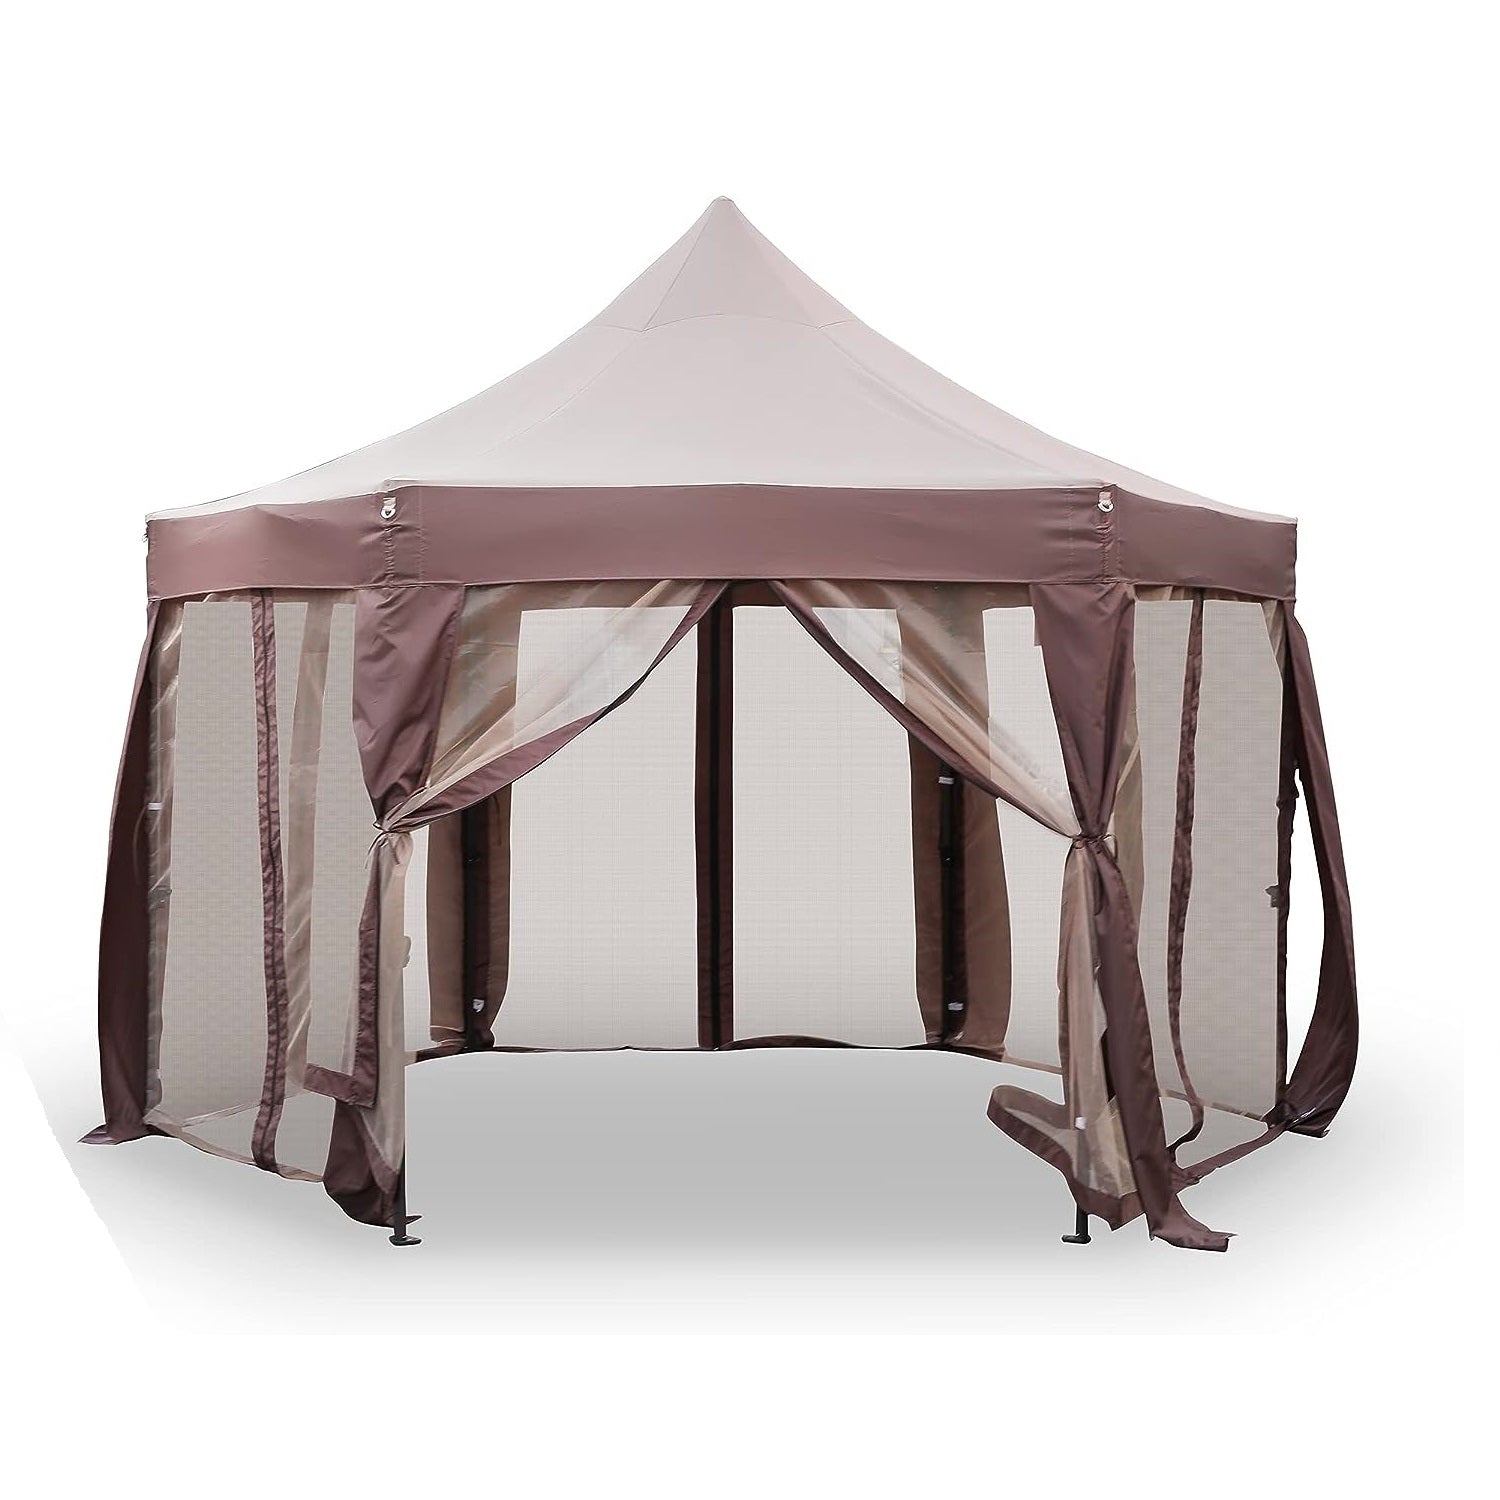 12' X 12' Gazebo with Mosquito Netting Outdoor Hexagonal Pop up Canopy Tent with Strong Iron Frame Storage Bag